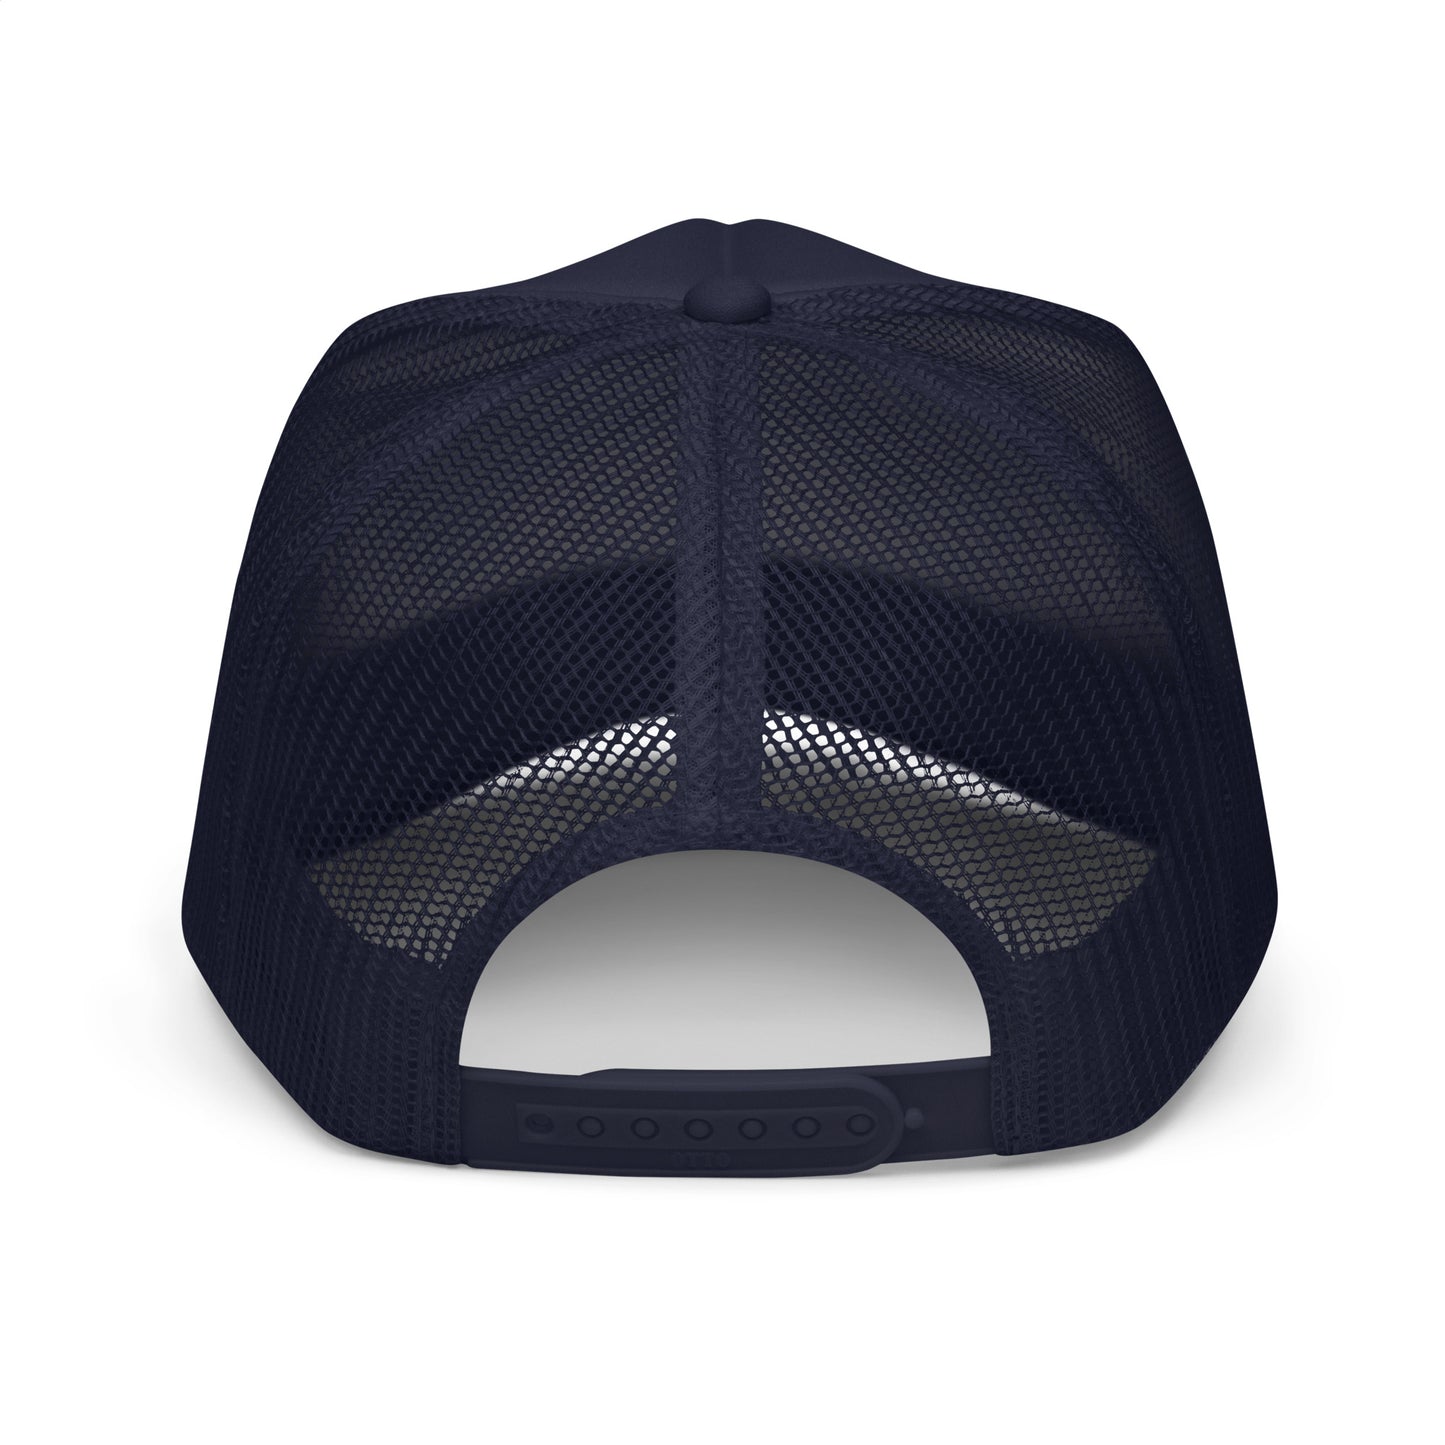 The Wave 954 Signatuer hat